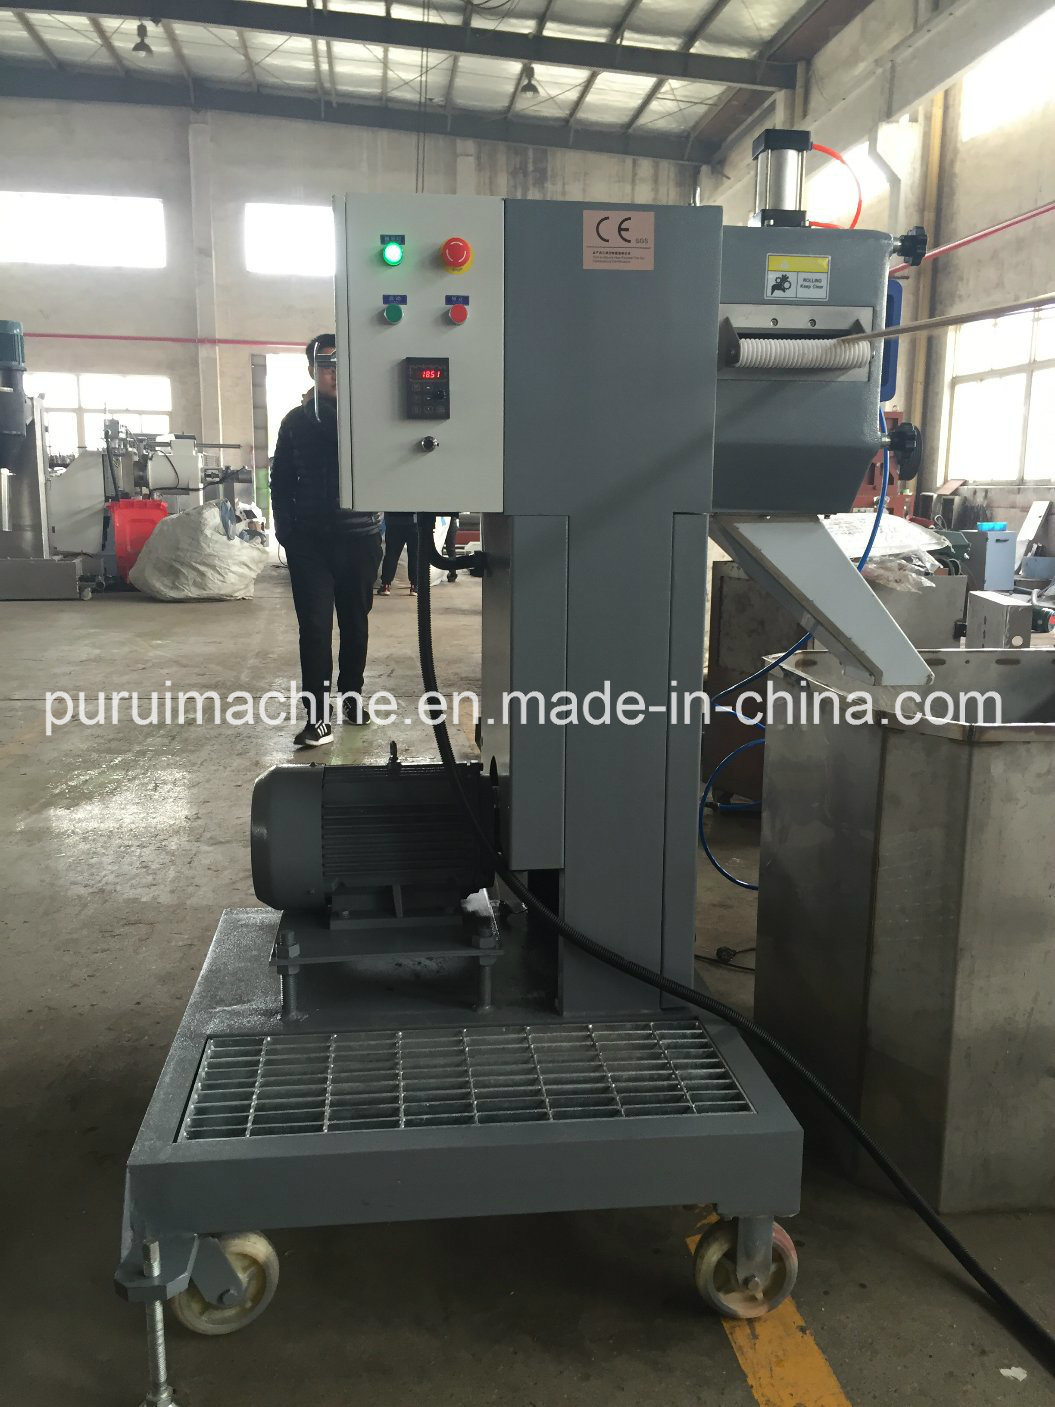 Single Screw Two Stage Plastic Extruder with Pulls Strap Cutter